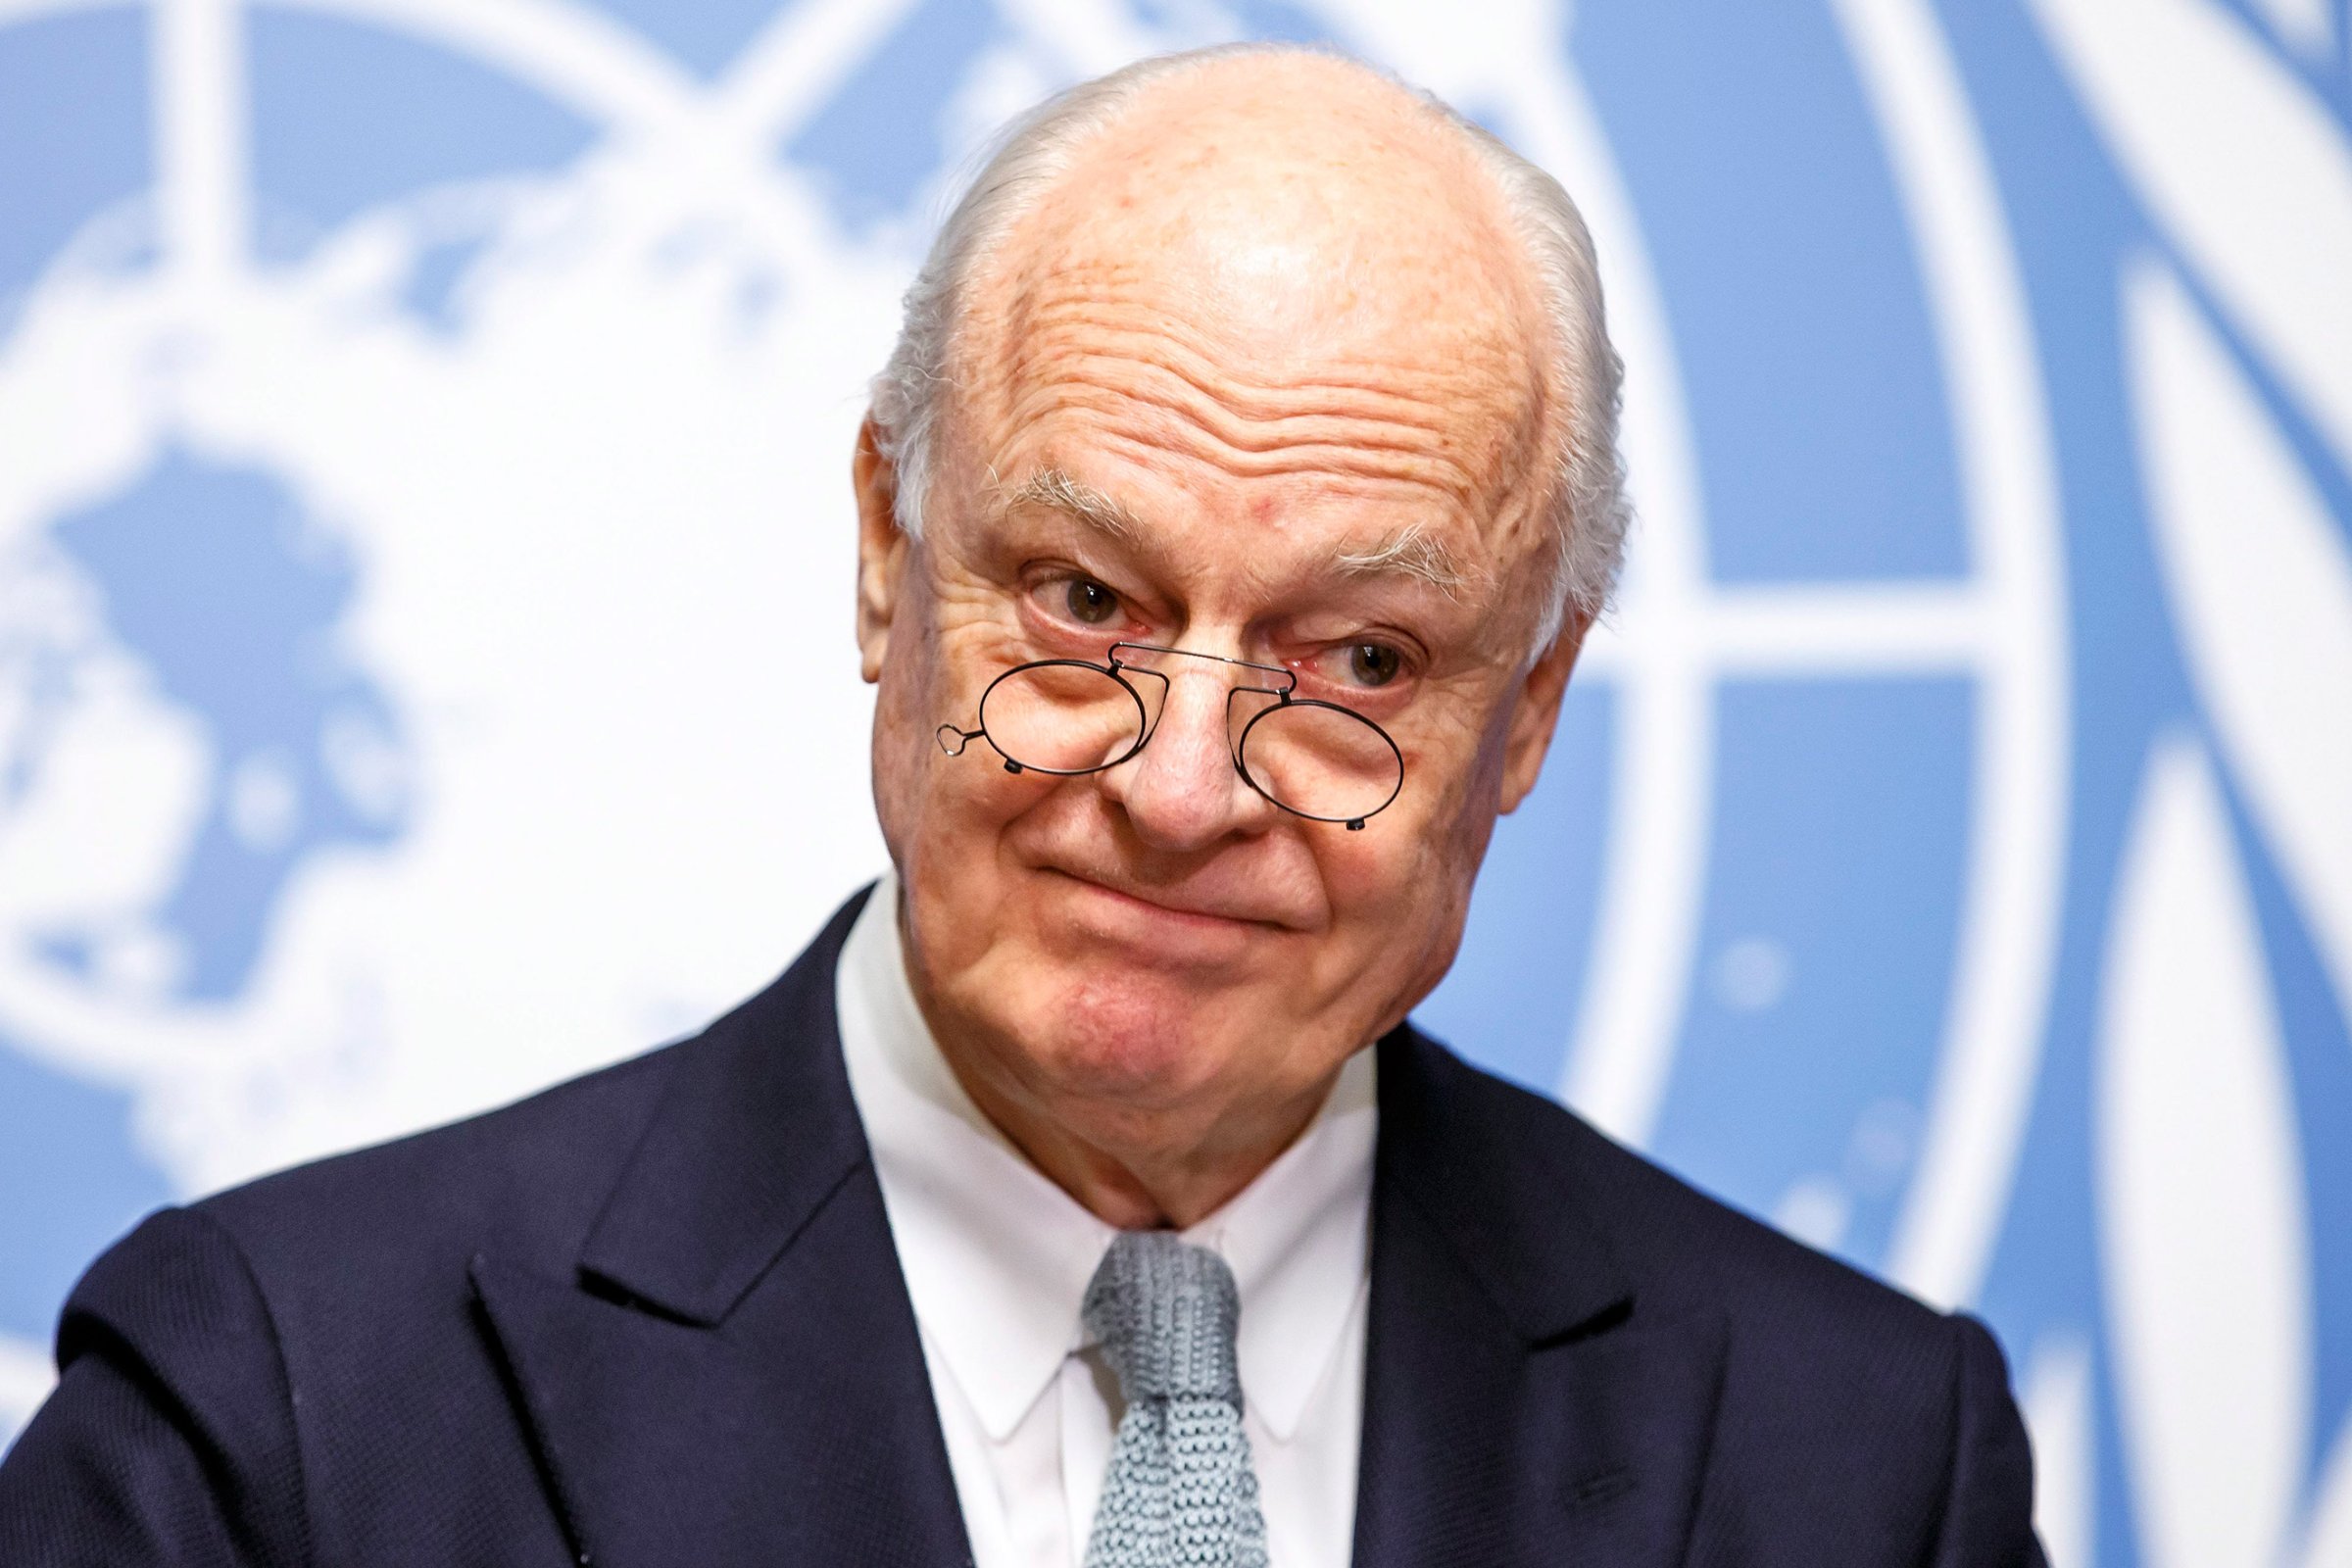 United Nations Special Envoy of the Secretary-General for Syria Staffan de Mistura informs the media on the upcoming talks during a press conference in Geneva, Switzerland, Jan. 25, 2016.